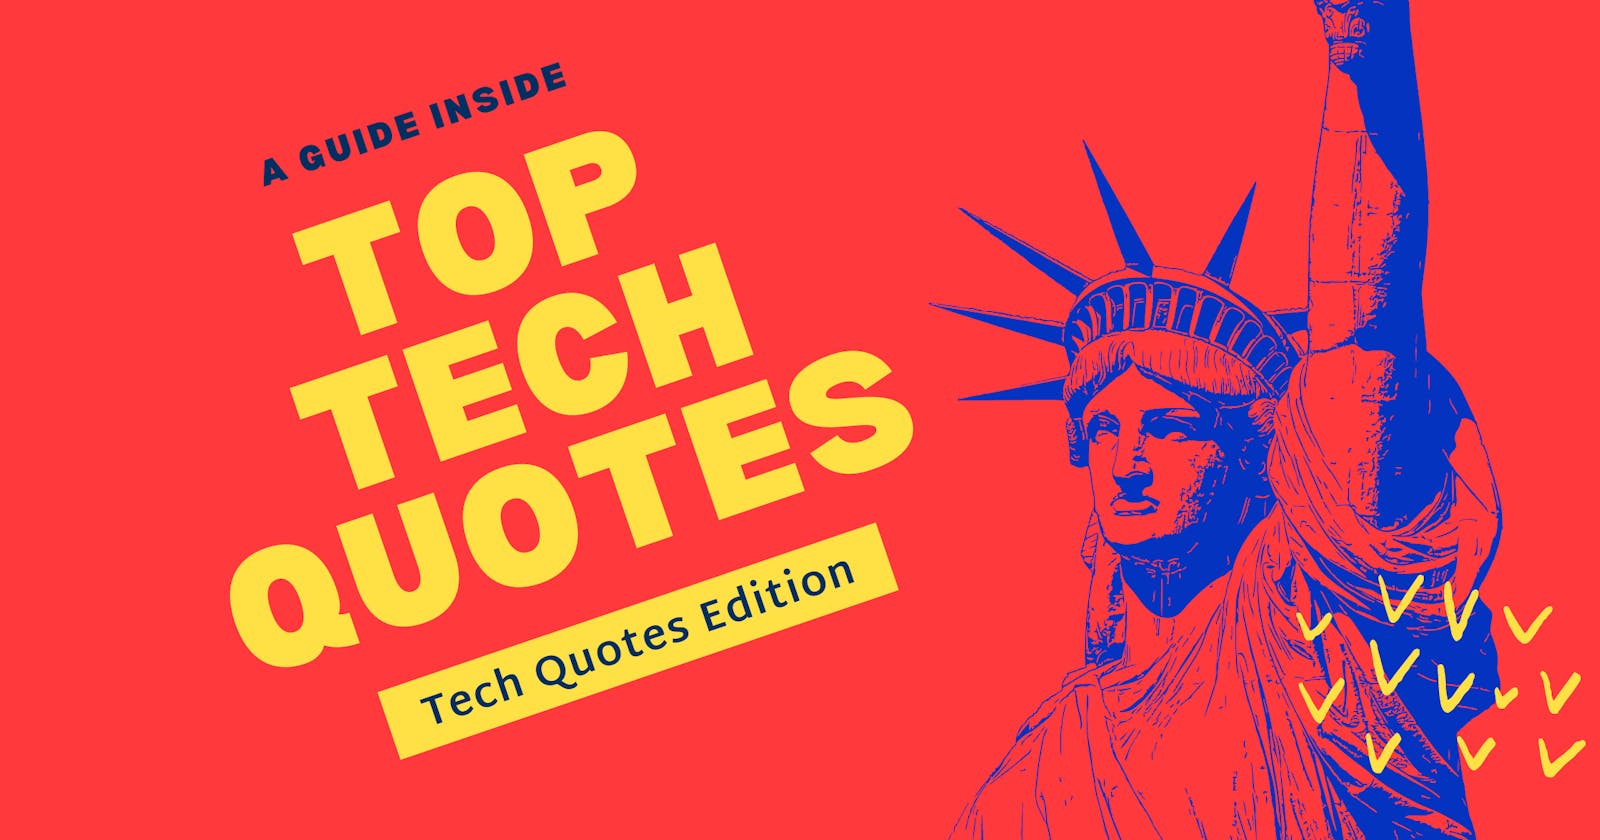 Technology Quotes to Make You Think